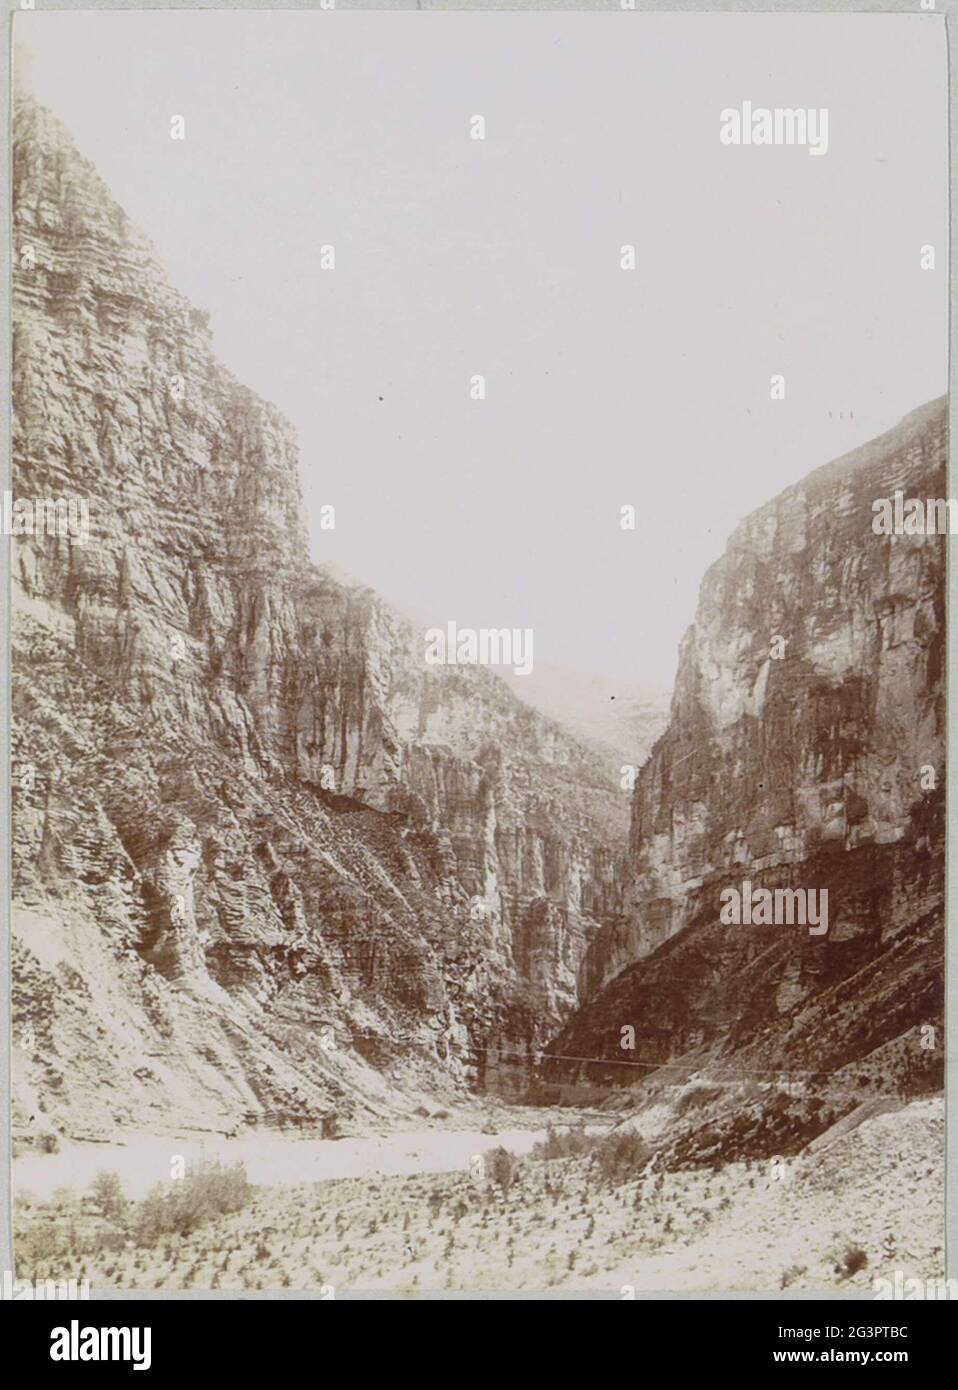 Gorge in the Gorges du Cians in the Alpes-Maritimes. Part of photo album from a French amateur photographer with recordings of trips in France, Spain, Belgium, Luxembourg and the Netherlands, the first automobiles and autoraces. Stock Photo